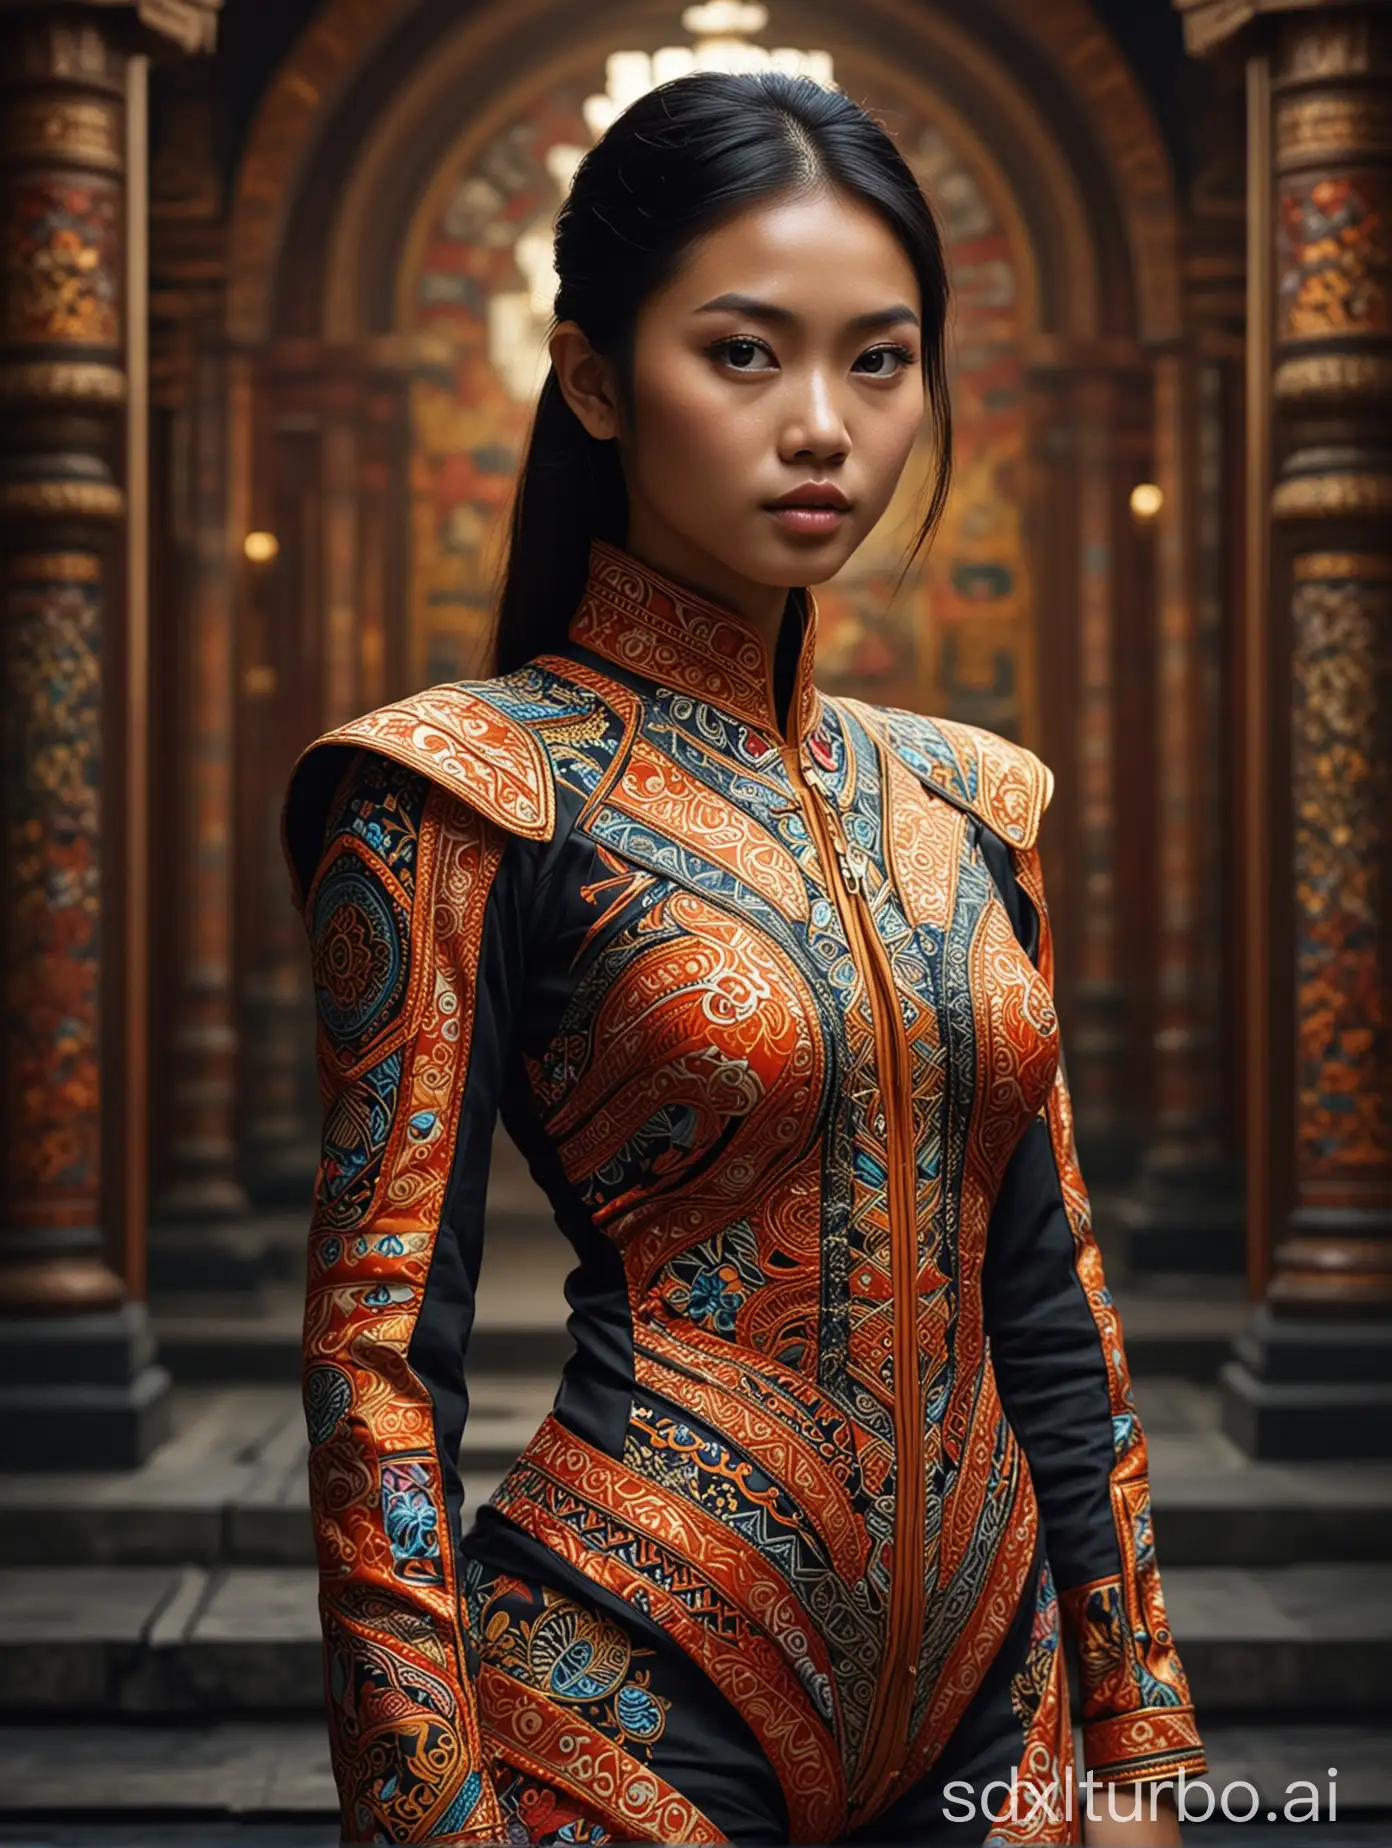 An Vietnamese-styled futuristic suit worn by a girl depicting cultural fusion and modern fashion. The suit is adorned with intricate patterns and vibrant colors, showcasing the rich heritage of Indonesia. The girl stands confidently in a dynamic pose, with her detailed eyes reflecting determination and curiosity. The suit's material is a combination of traditional textiles and futuristic synthetic fabrics, giving it a unique and avant-garde appearance. The overall image quality is of the highest standard, with sharp focus and ultra-detailed rendering. The artwork employs physically-based rendering techniques, resulting in realistic lighting and shadows. The colors are vivid and vibrant, capturing the essence of Indonesian cultural aesthetics. The background features a fusion of modern architecture and traditional elements, creating a harmonious blend of the past and the future. The prompt explores the intersection of Indonesian culture, futuristic design, and the artistic representation of a confident girl